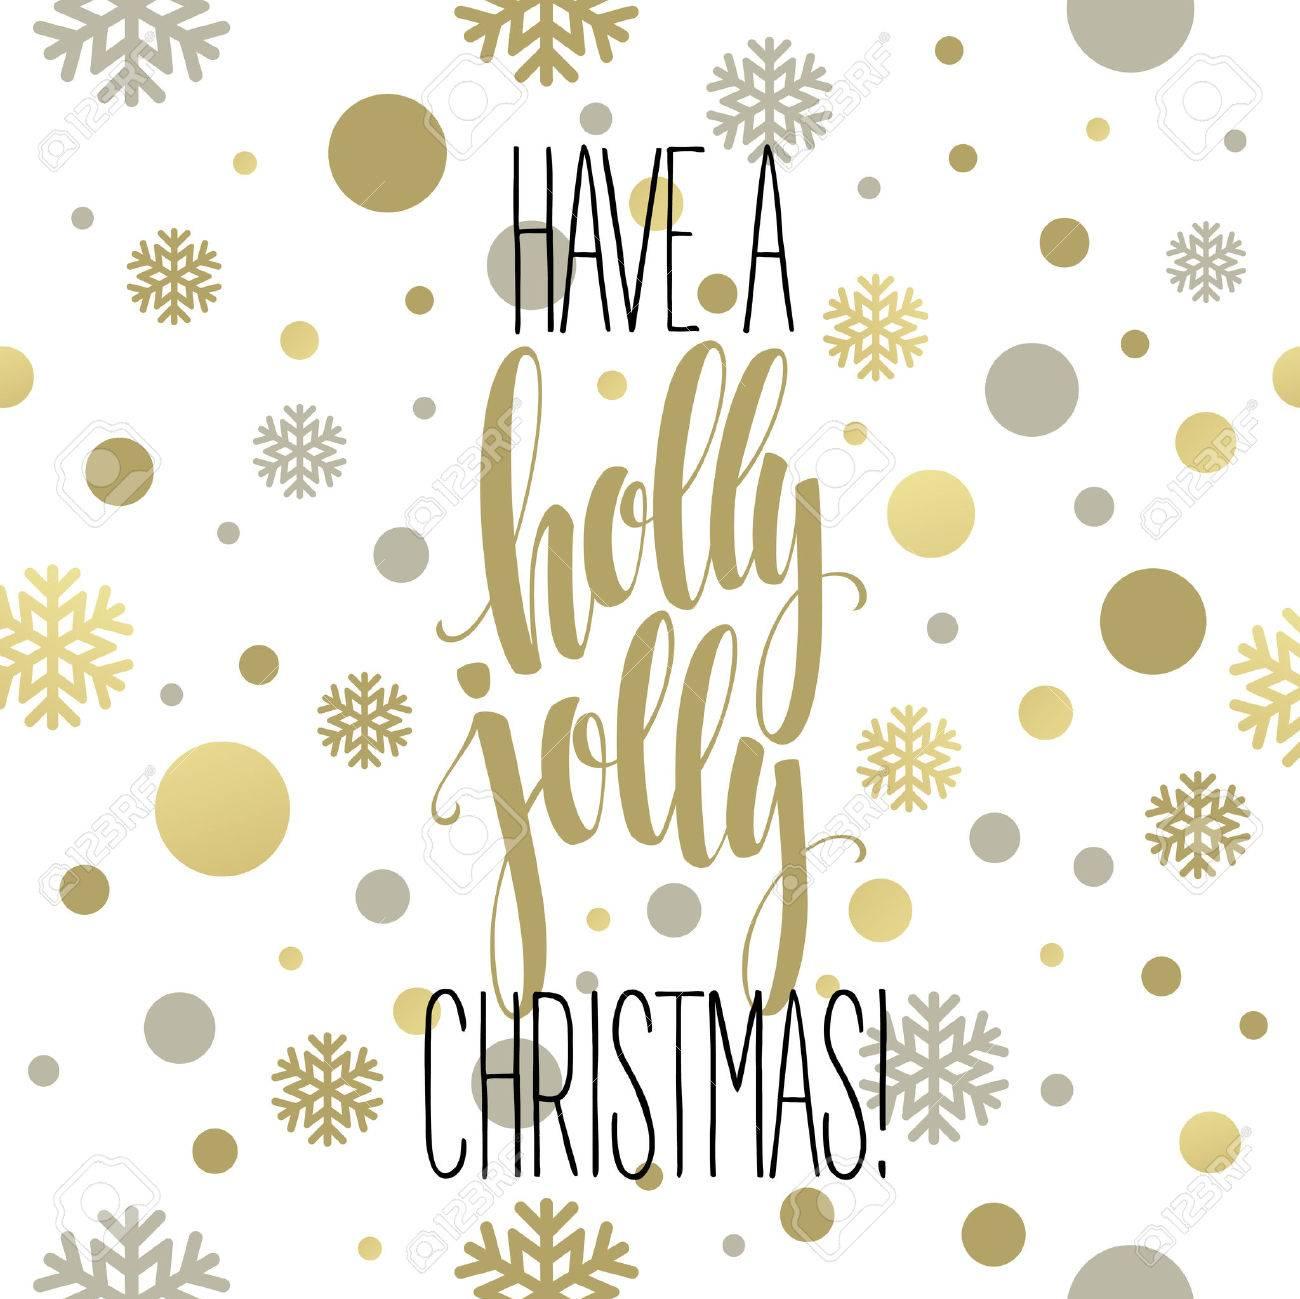 Have A Holly Jolly Christmas Lettering Vector Illustration